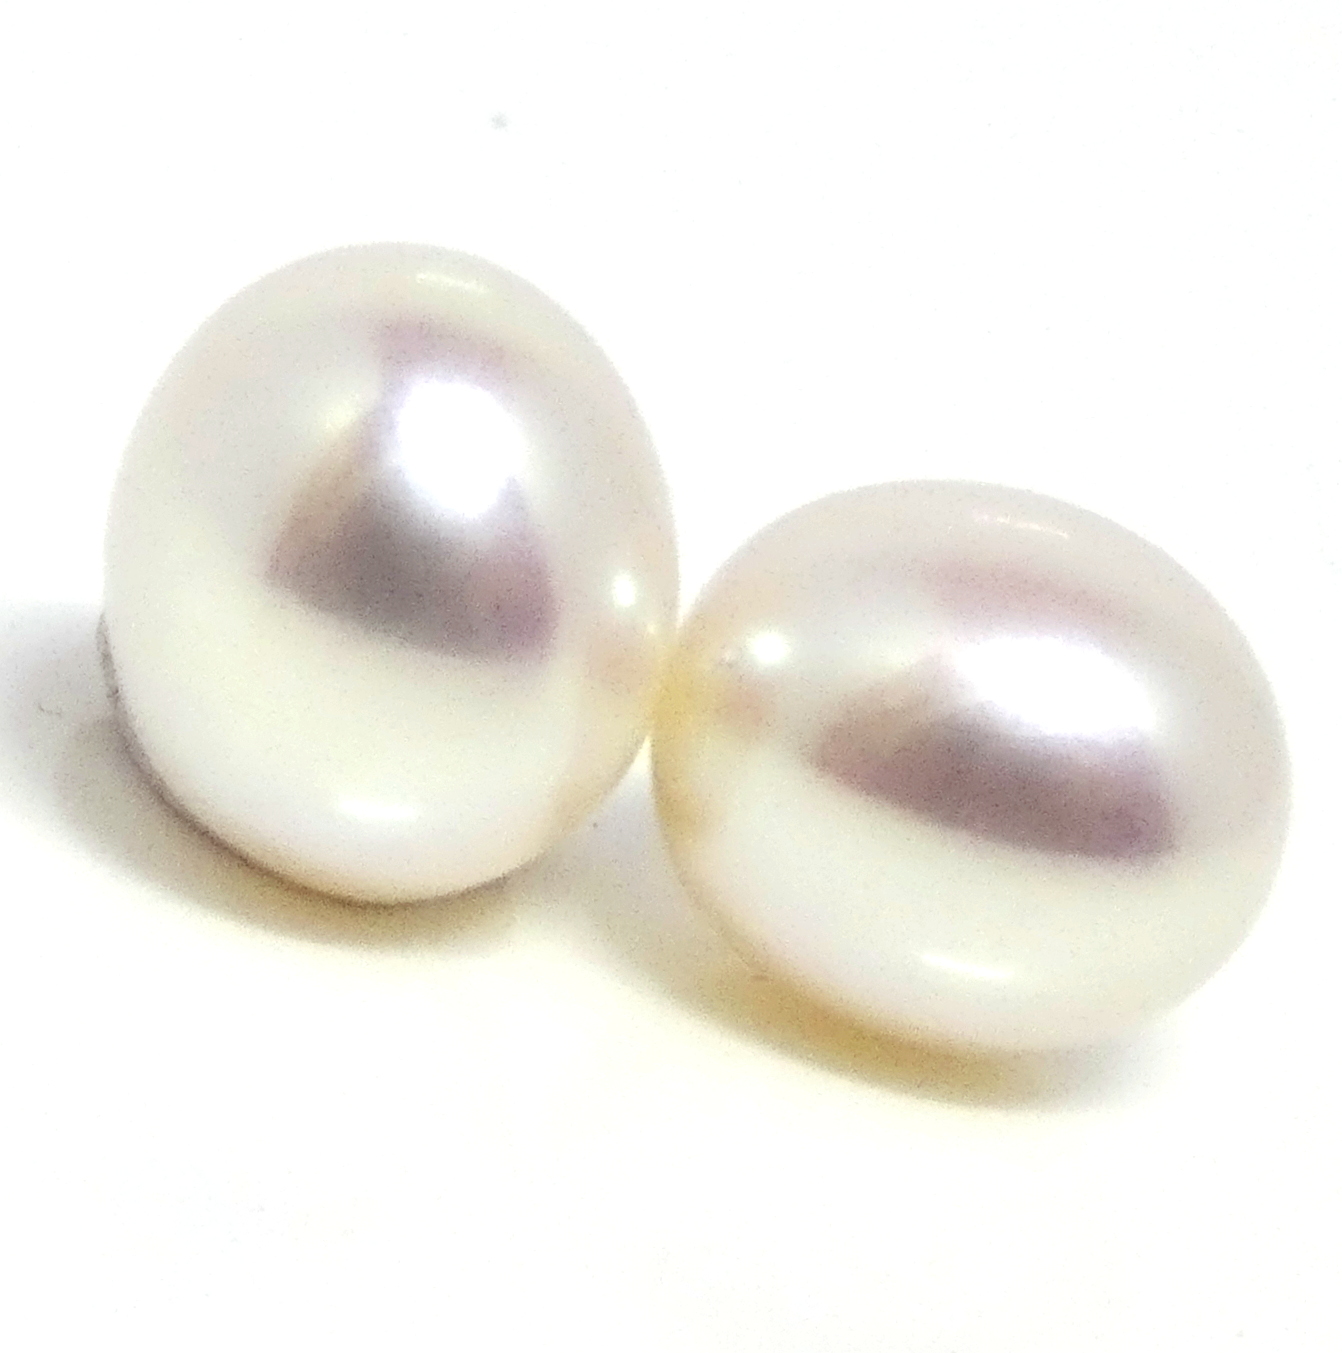 White 10-11mm Drop Undrilled Pairs